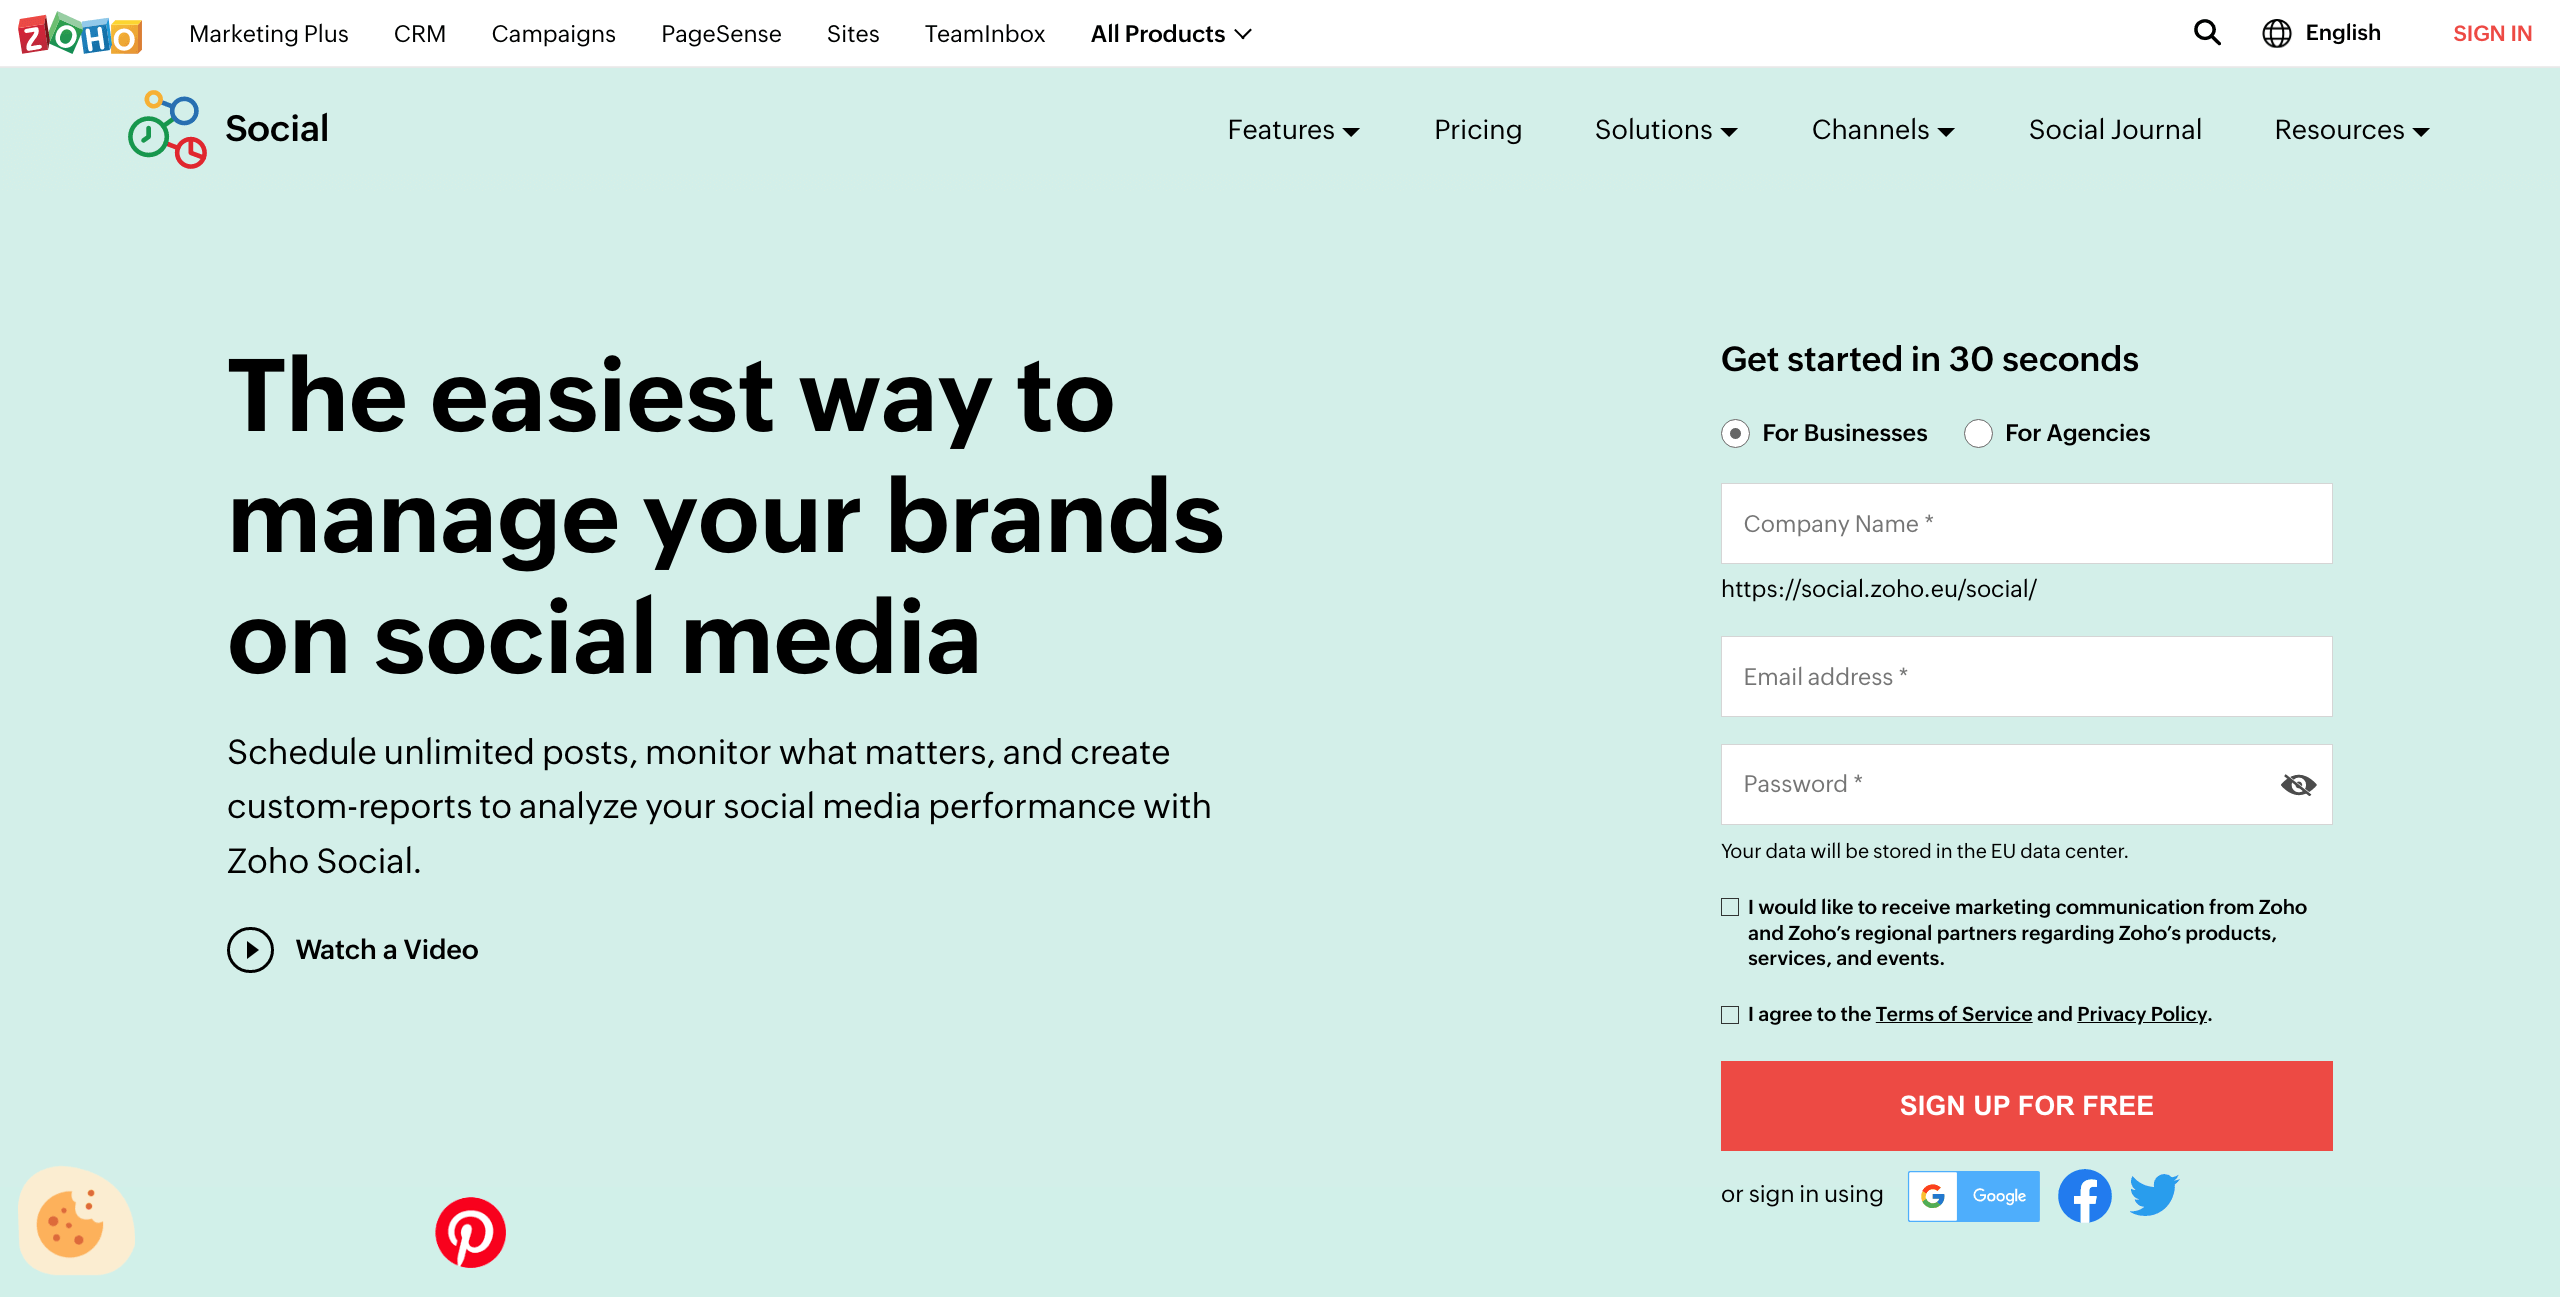 Zoho Social homepage, an agency tool for managing brands on social media